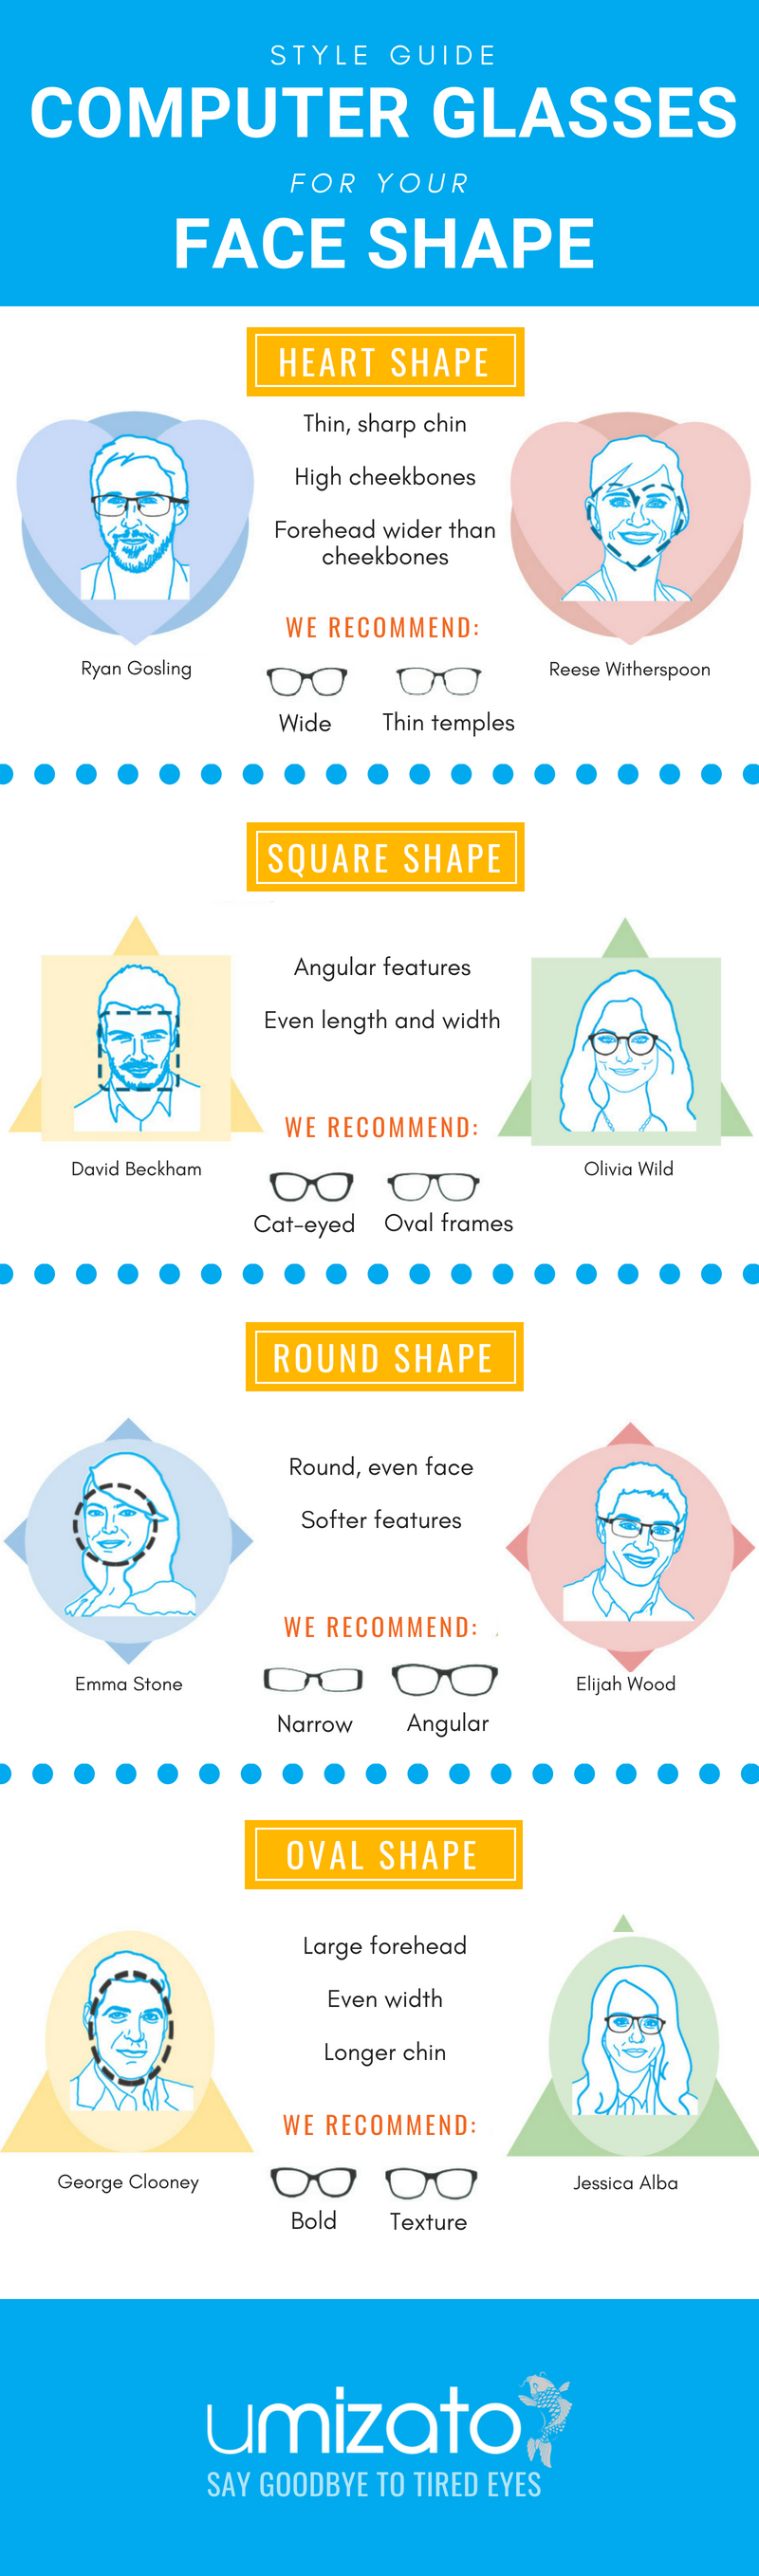 How to find the right computer glasses for your face shape infographic | Umizato